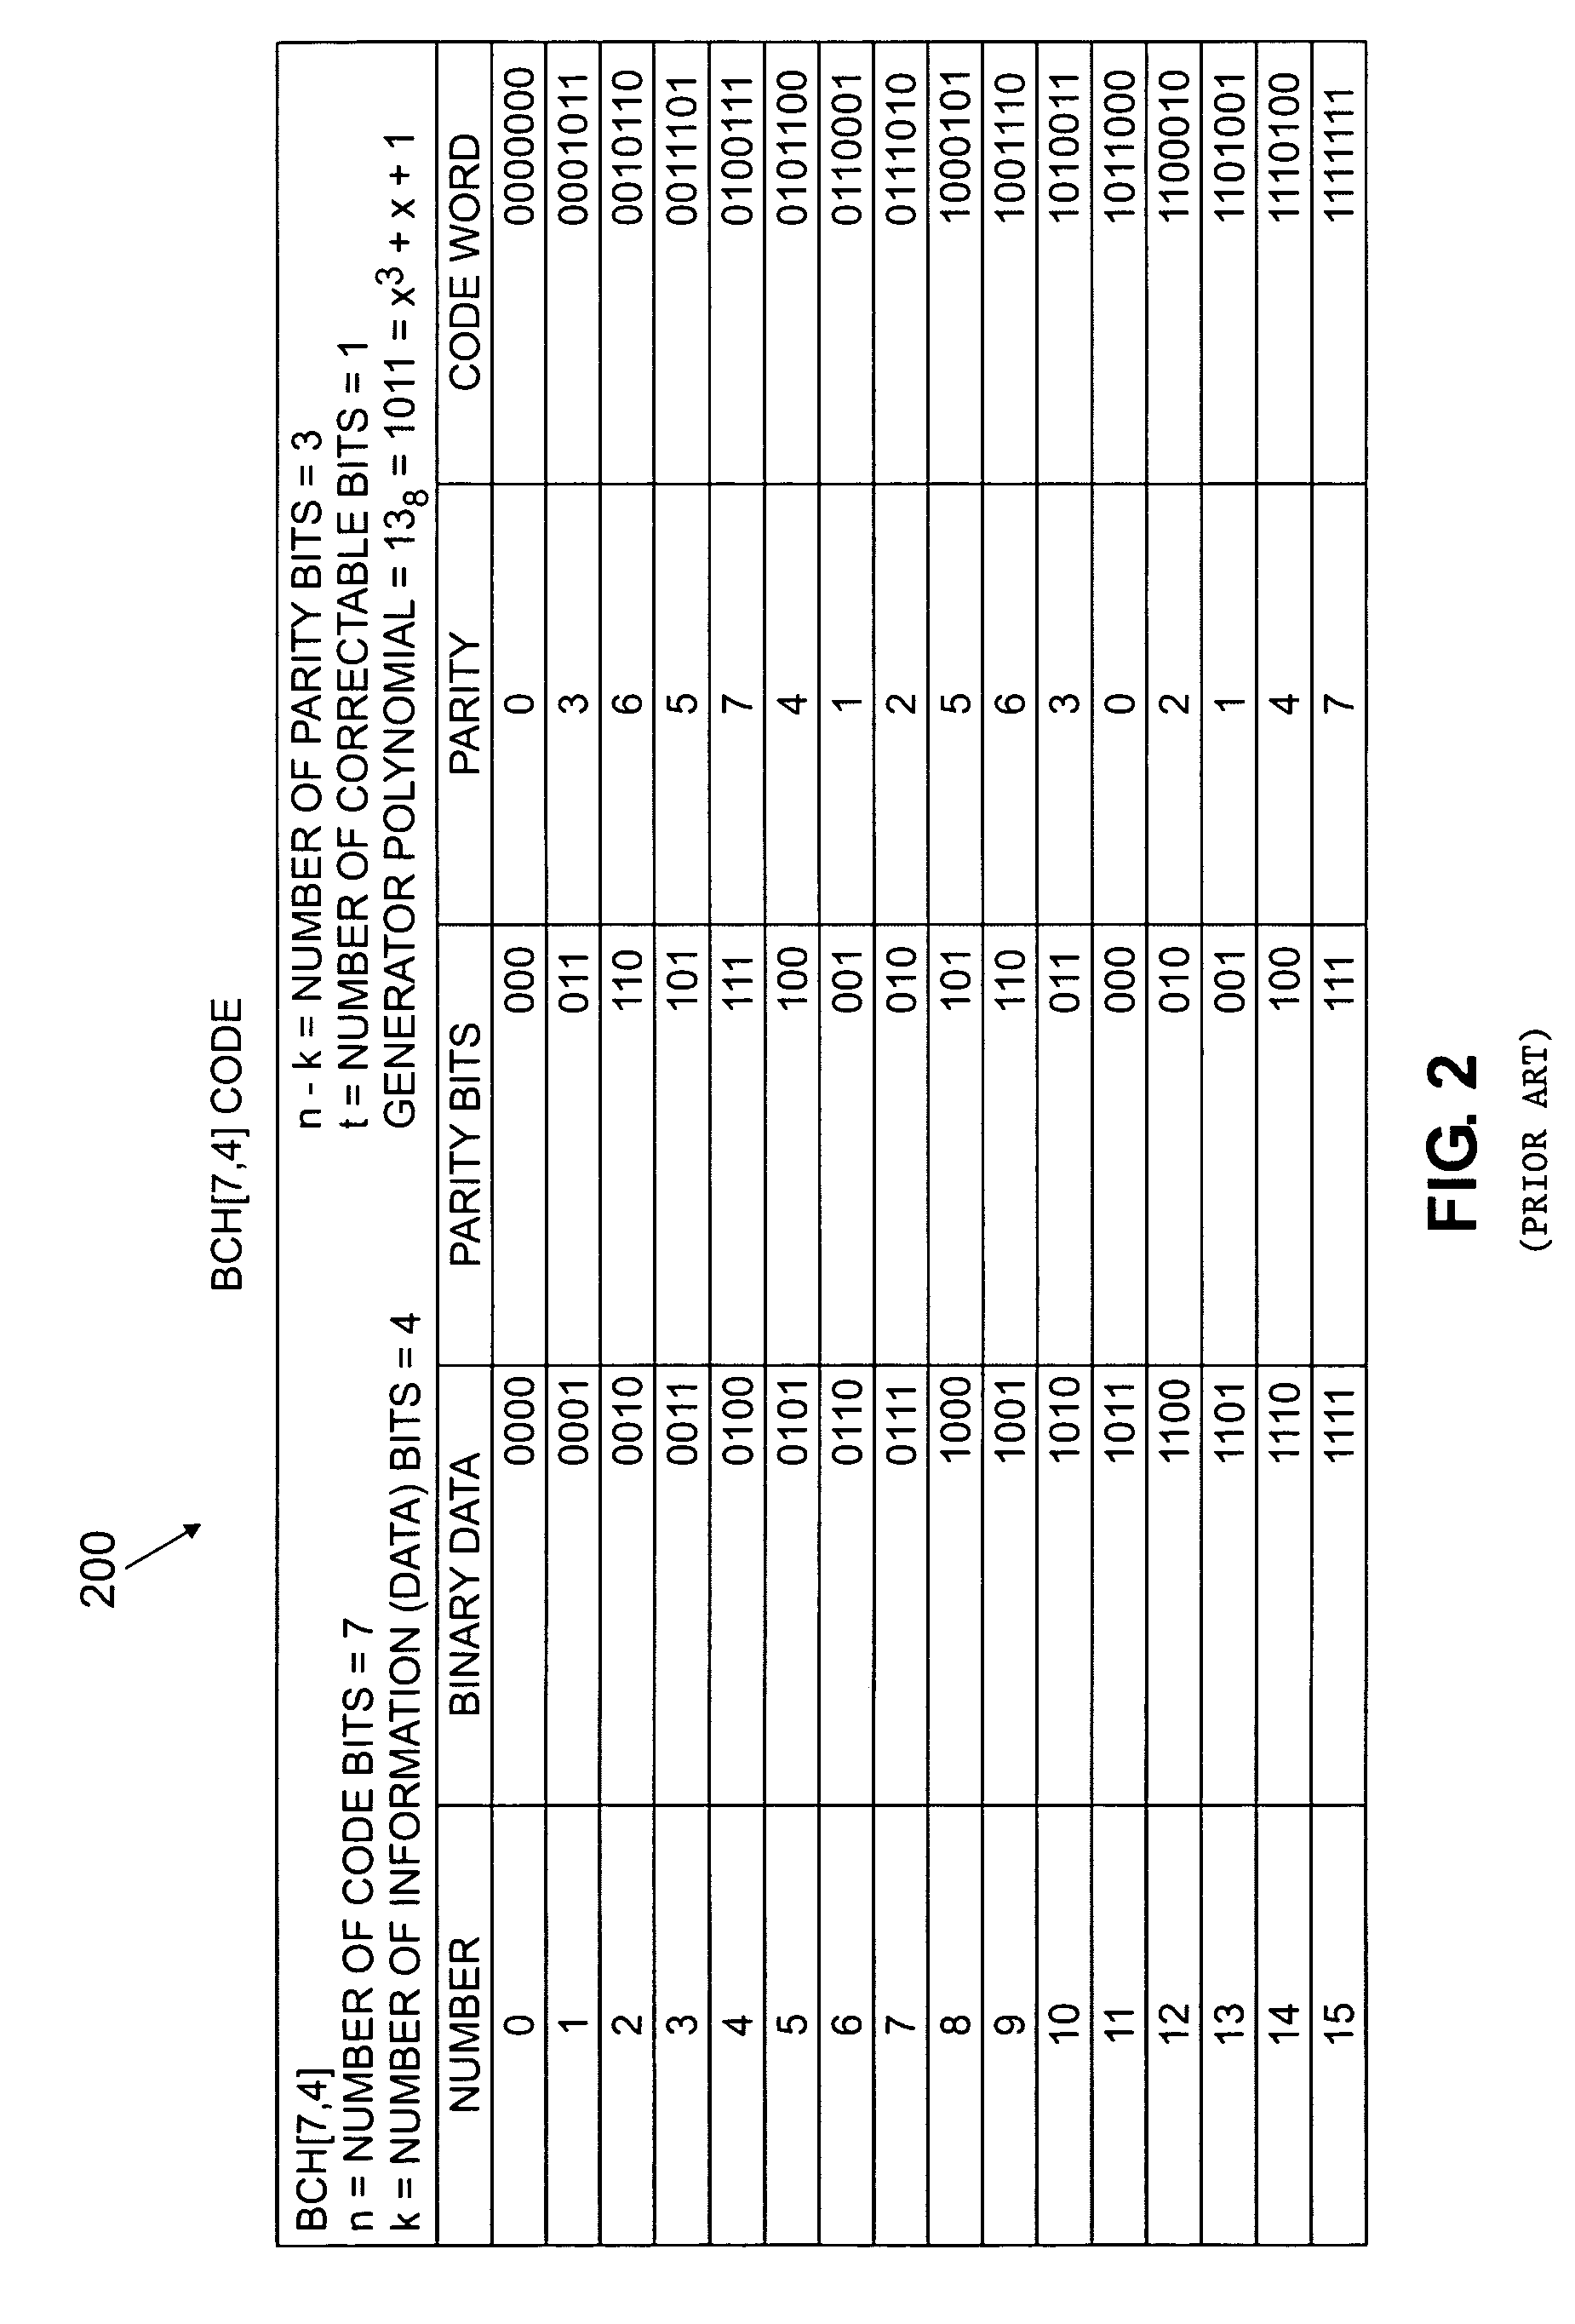 Apparatus and method for using an error correcting code to achieve data compression in a data communication network